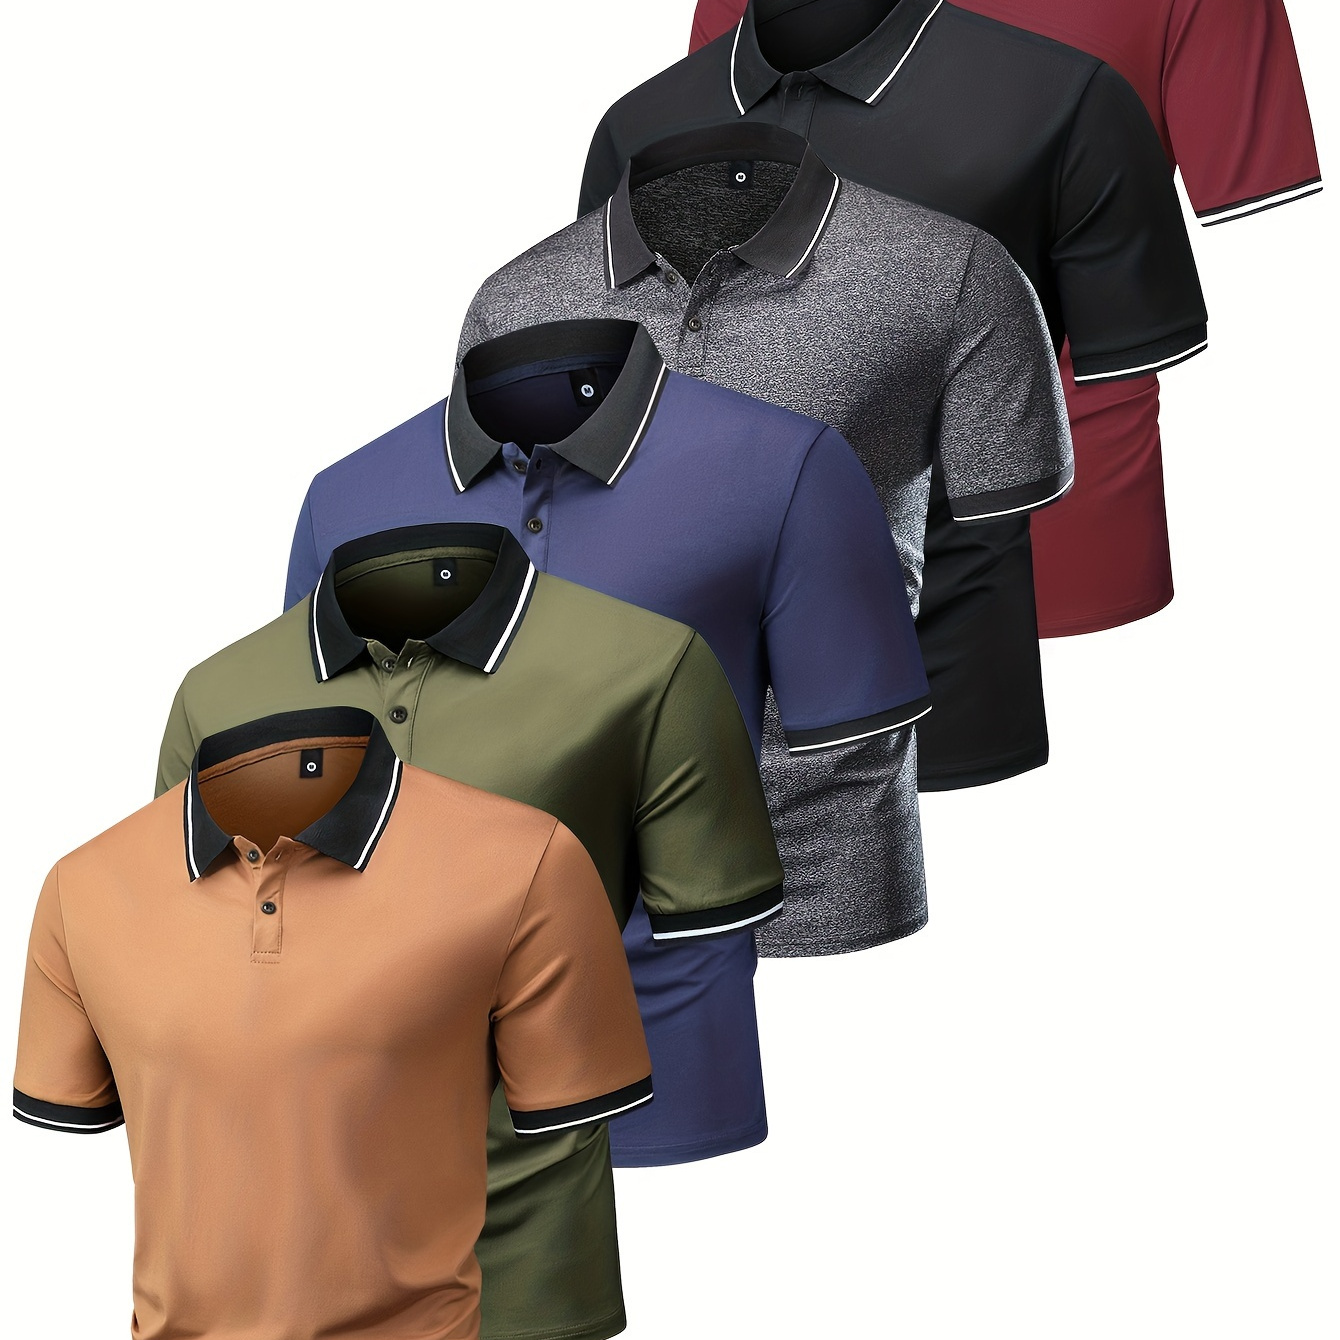 

6pcs Summer Men's Fashionable Lapel Short Sleeve Golf T-shirt, Suitable For Commercial Entertainment Occasions, Such As Tennis And Golf, Men's Clothing, As Gifts